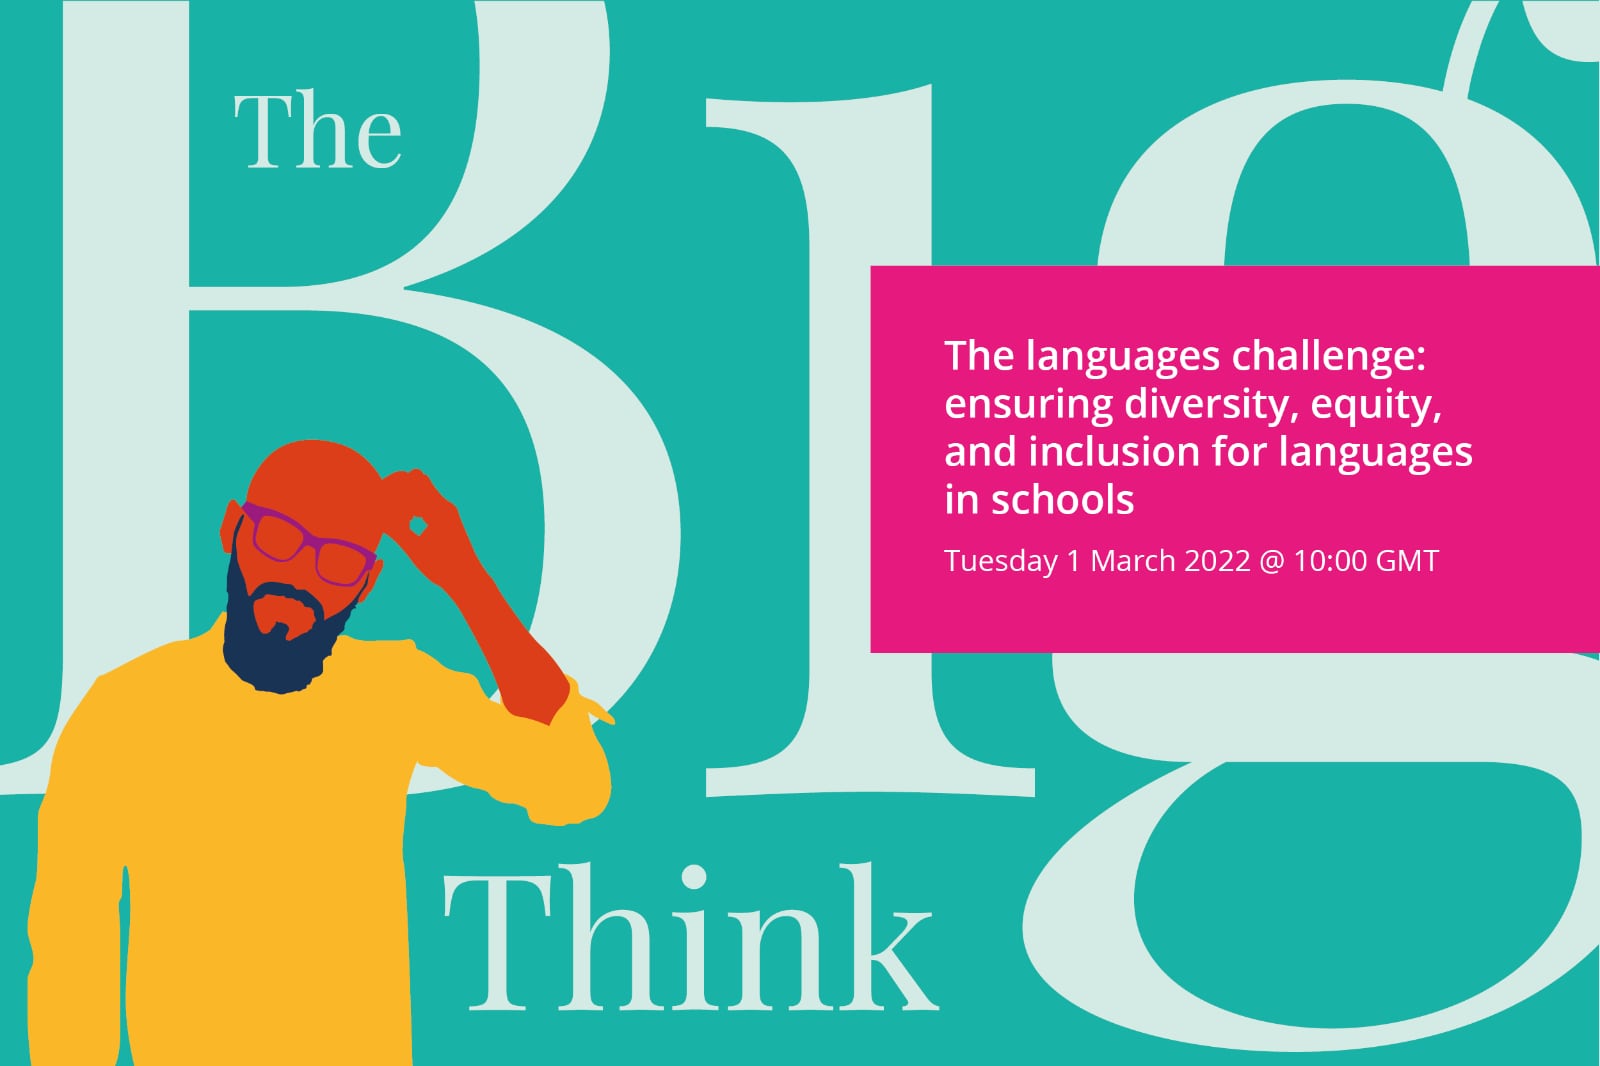 The Big Think: The languages challenge